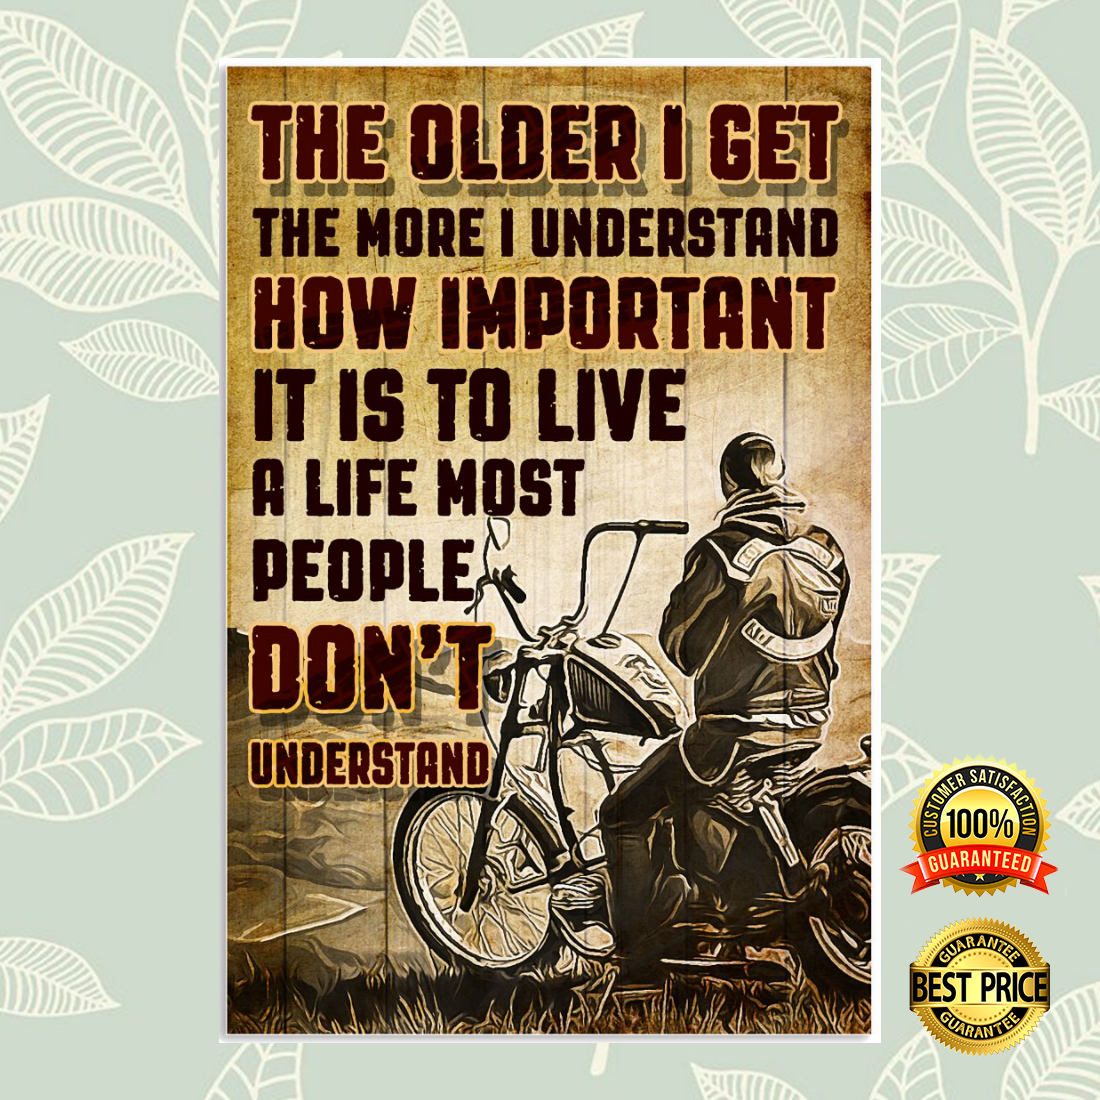 MOTORCYCLE THE OLDER I GET THE MORE I UNDERSTAND HOW IMPORTANT IT IS TO LIVE A LIFE MOST PEOPLE DON’T UNDERSTAND POSTER